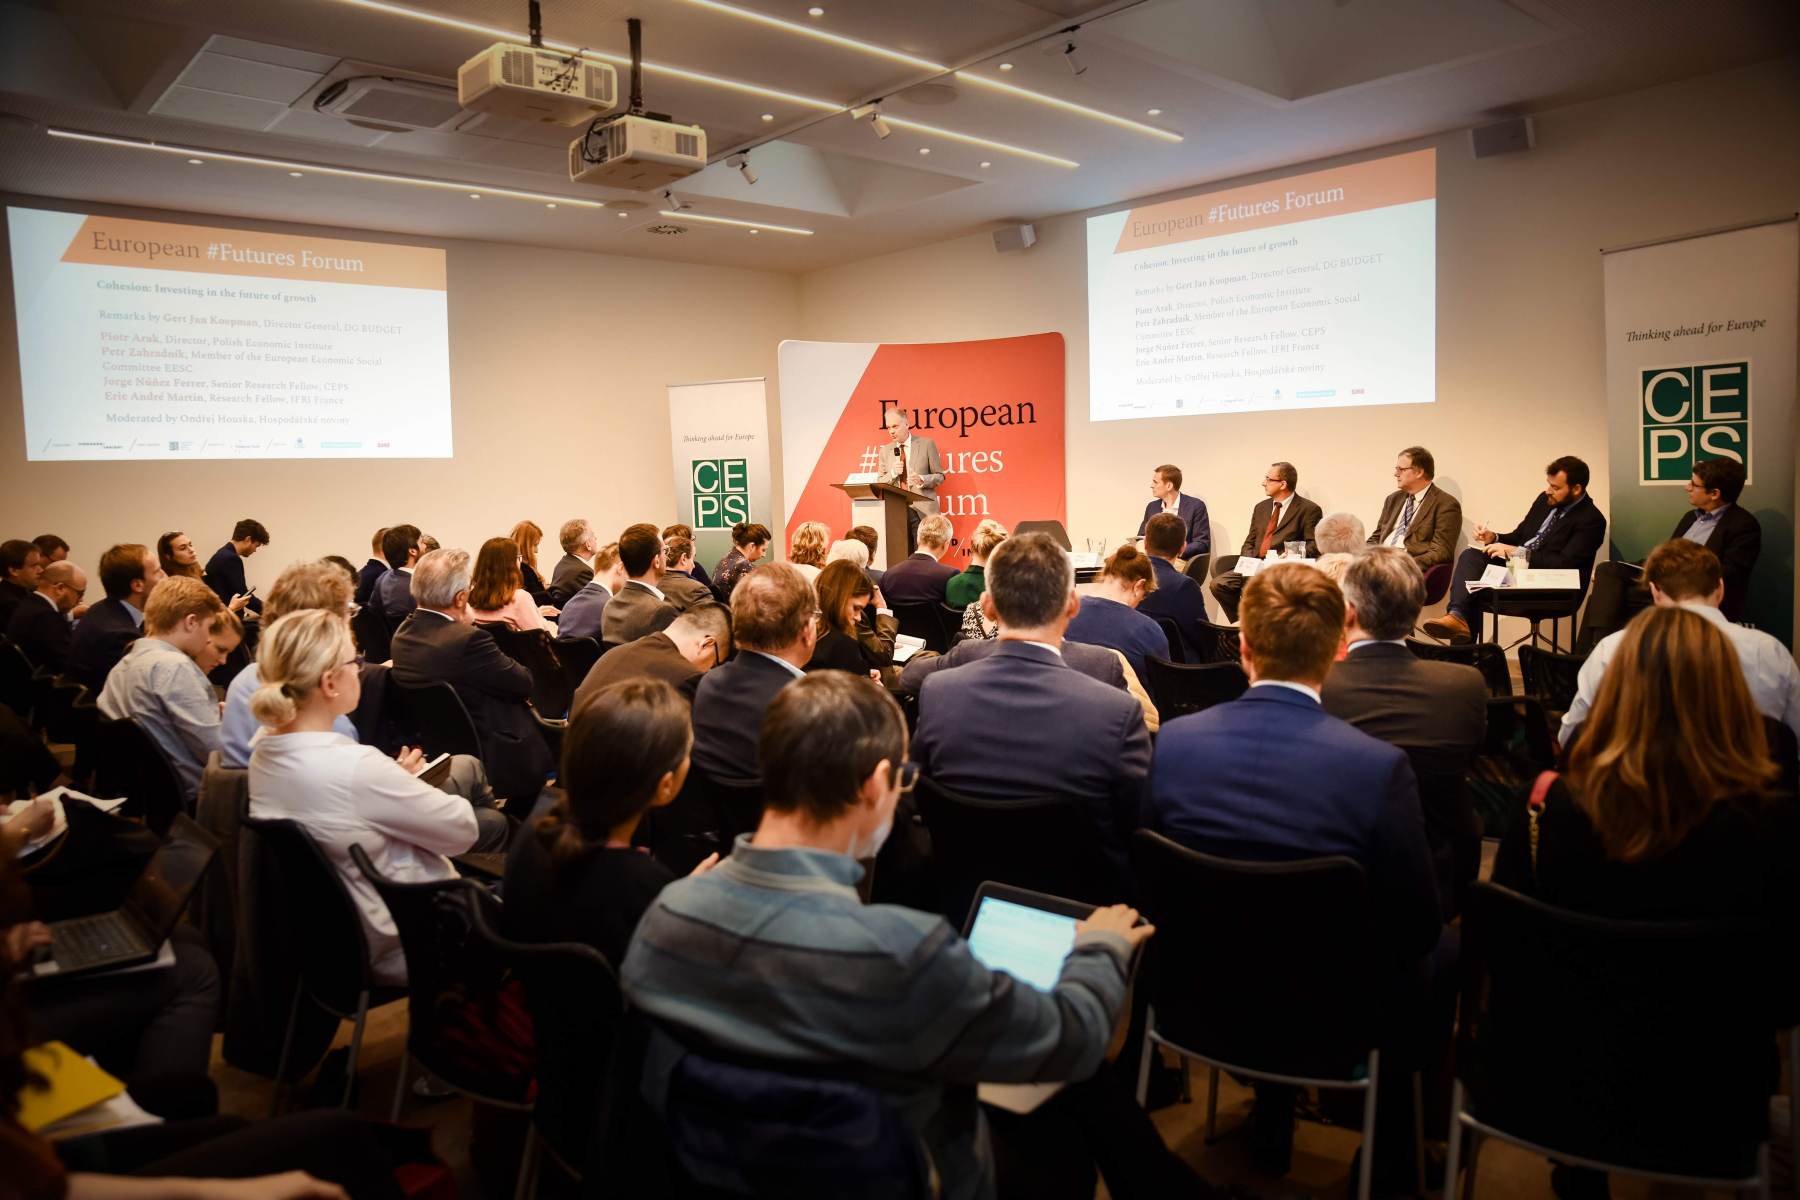 Featured image: EFF conference in 2019 in Brussels organised by Visegrad Insight – Res Publica Foundation jointly with CEPS.